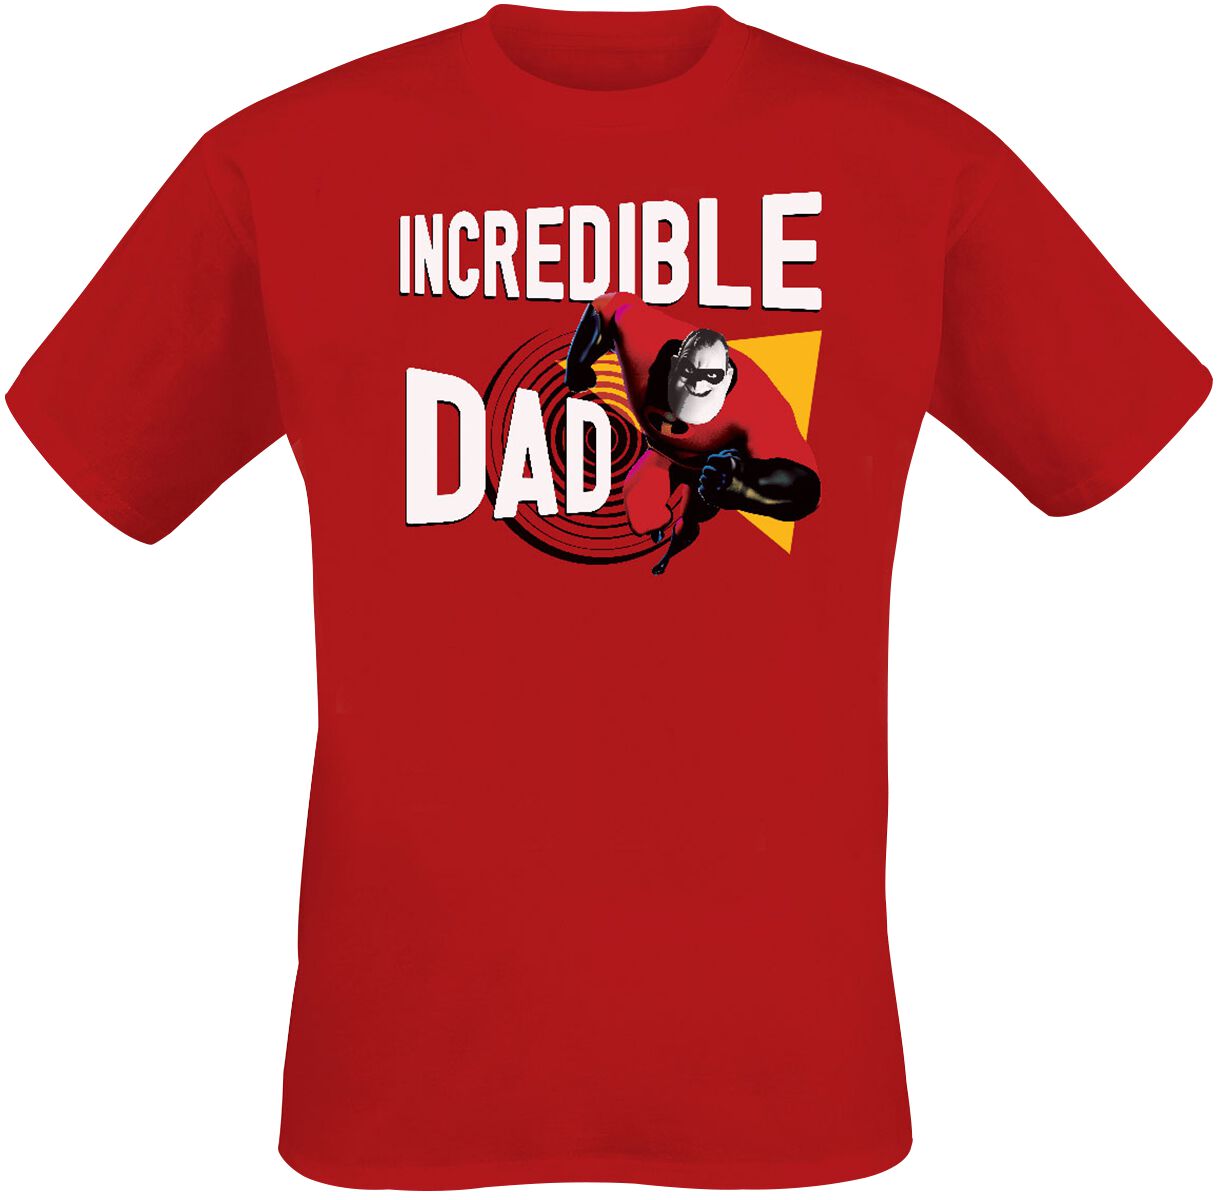 The Incredibles Incredible Dad T-Shirt red